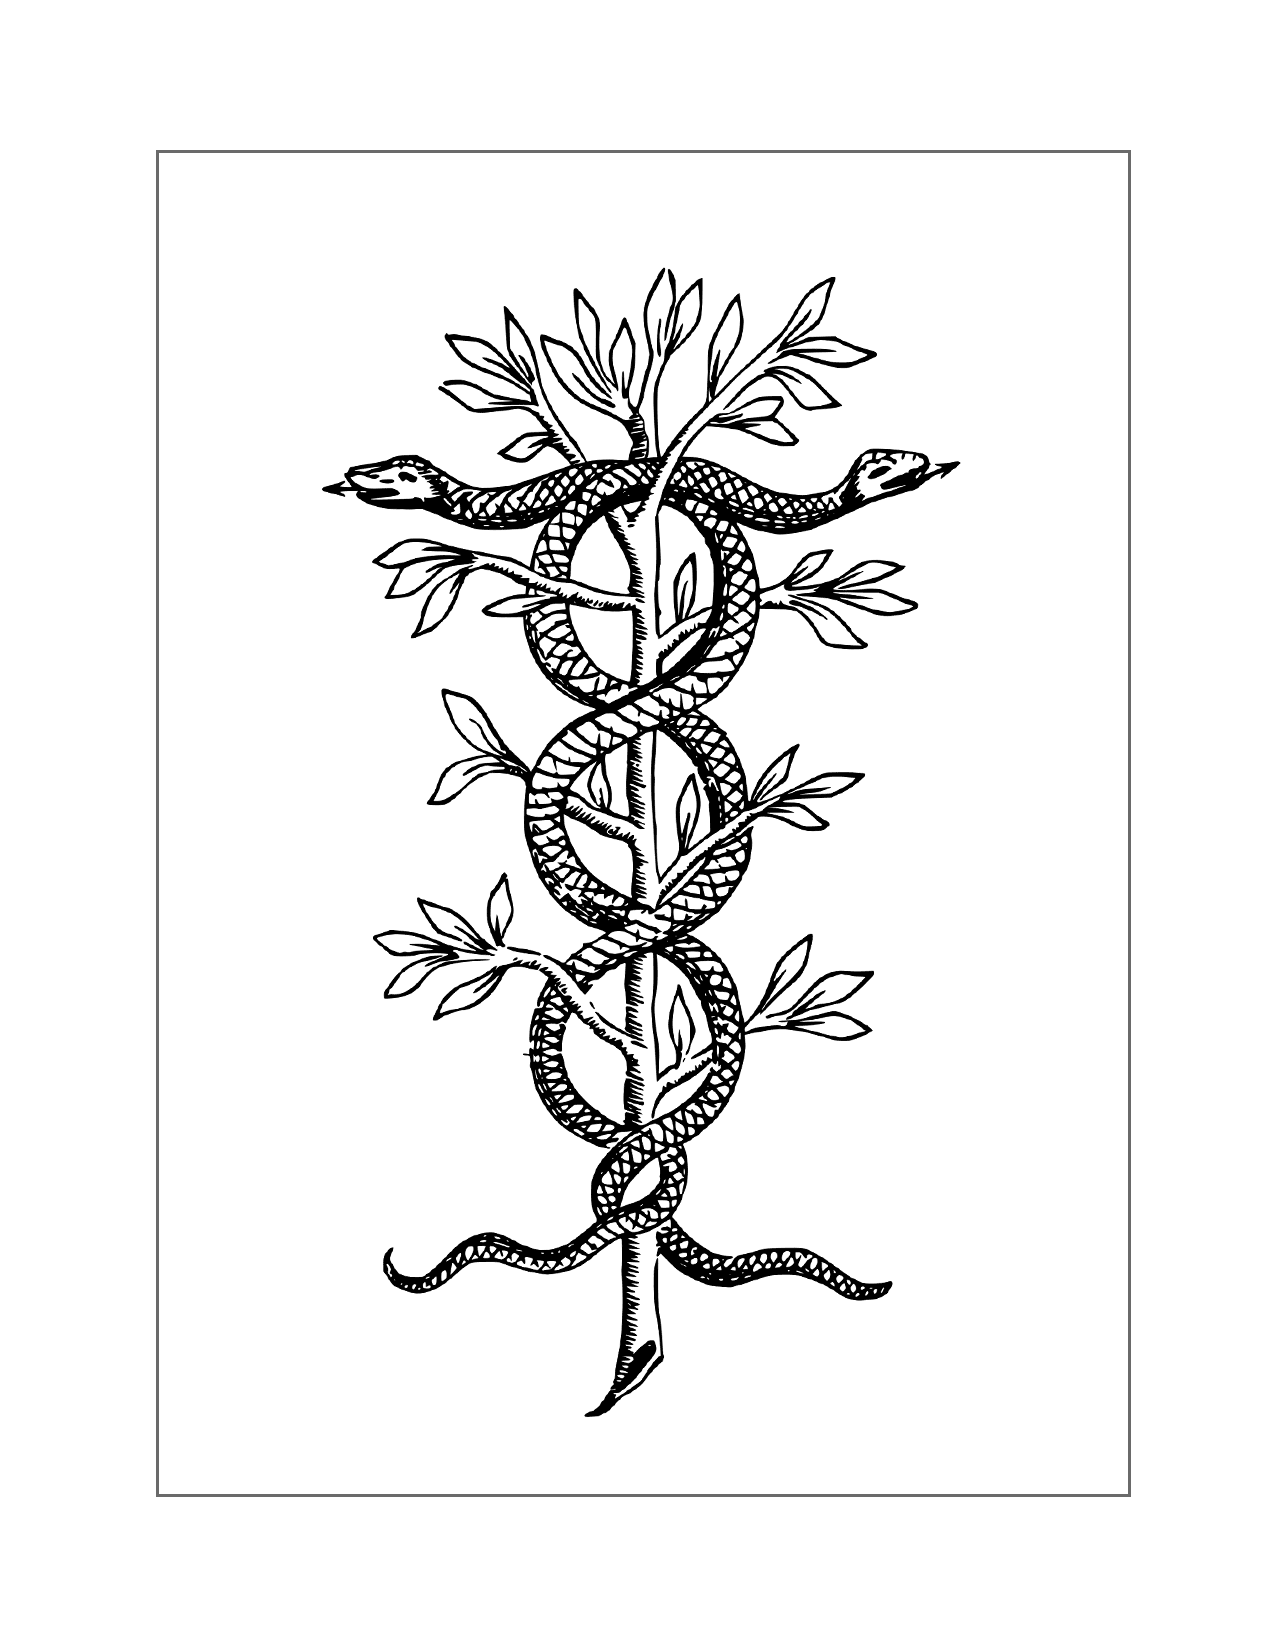 Symbol Two Snakes Coloring Page